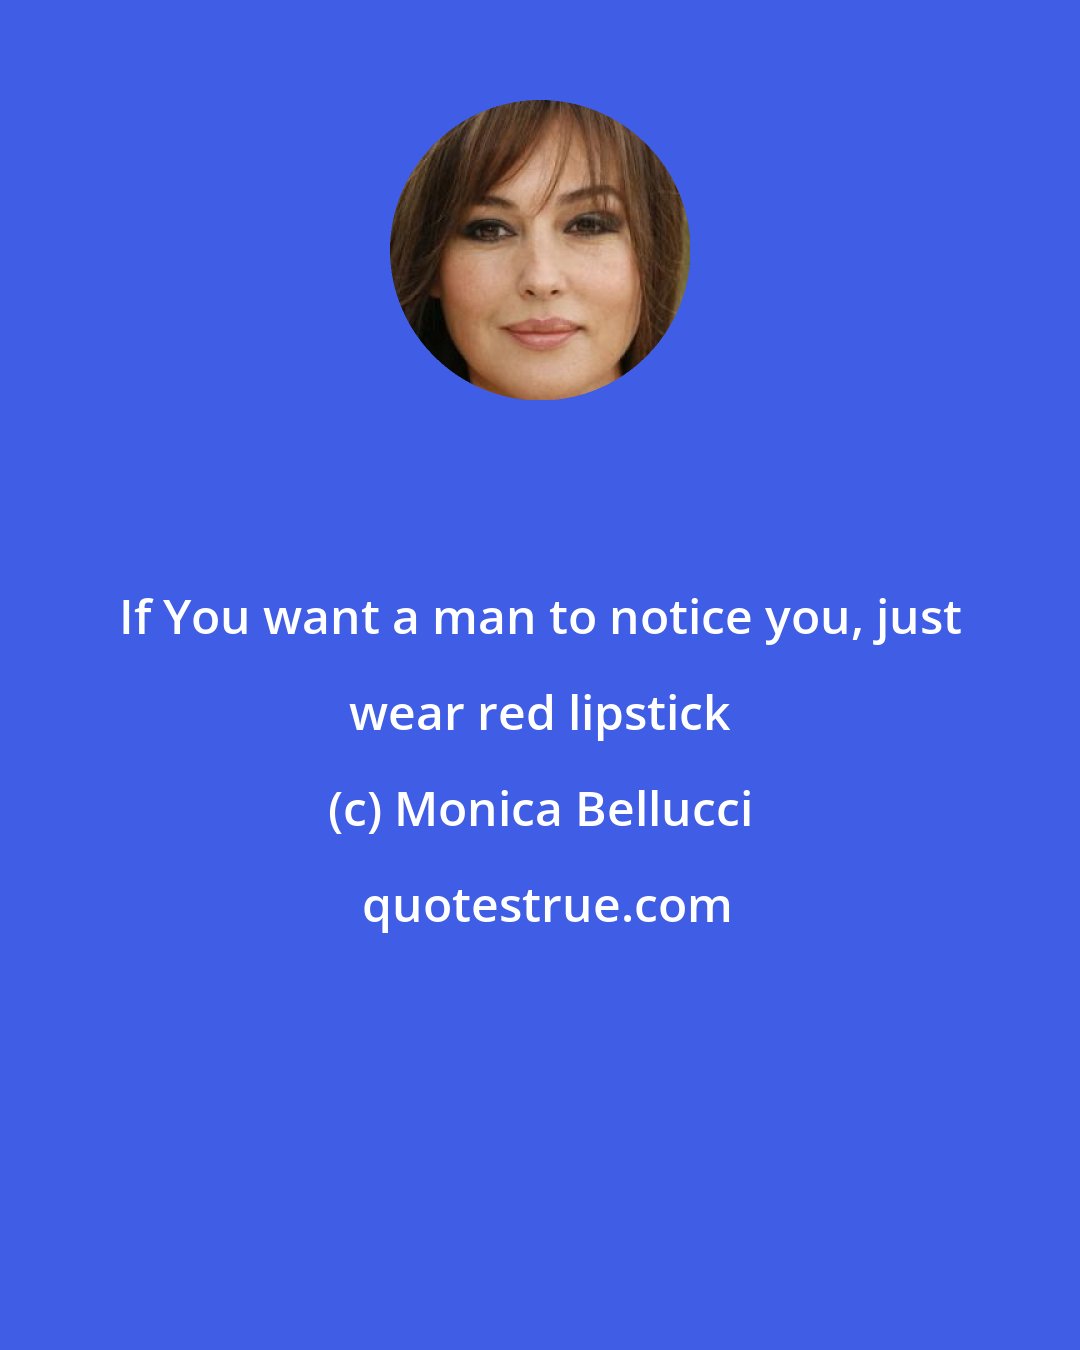 Monica Bellucci: If You want a man to notice you, just wear red lipstick